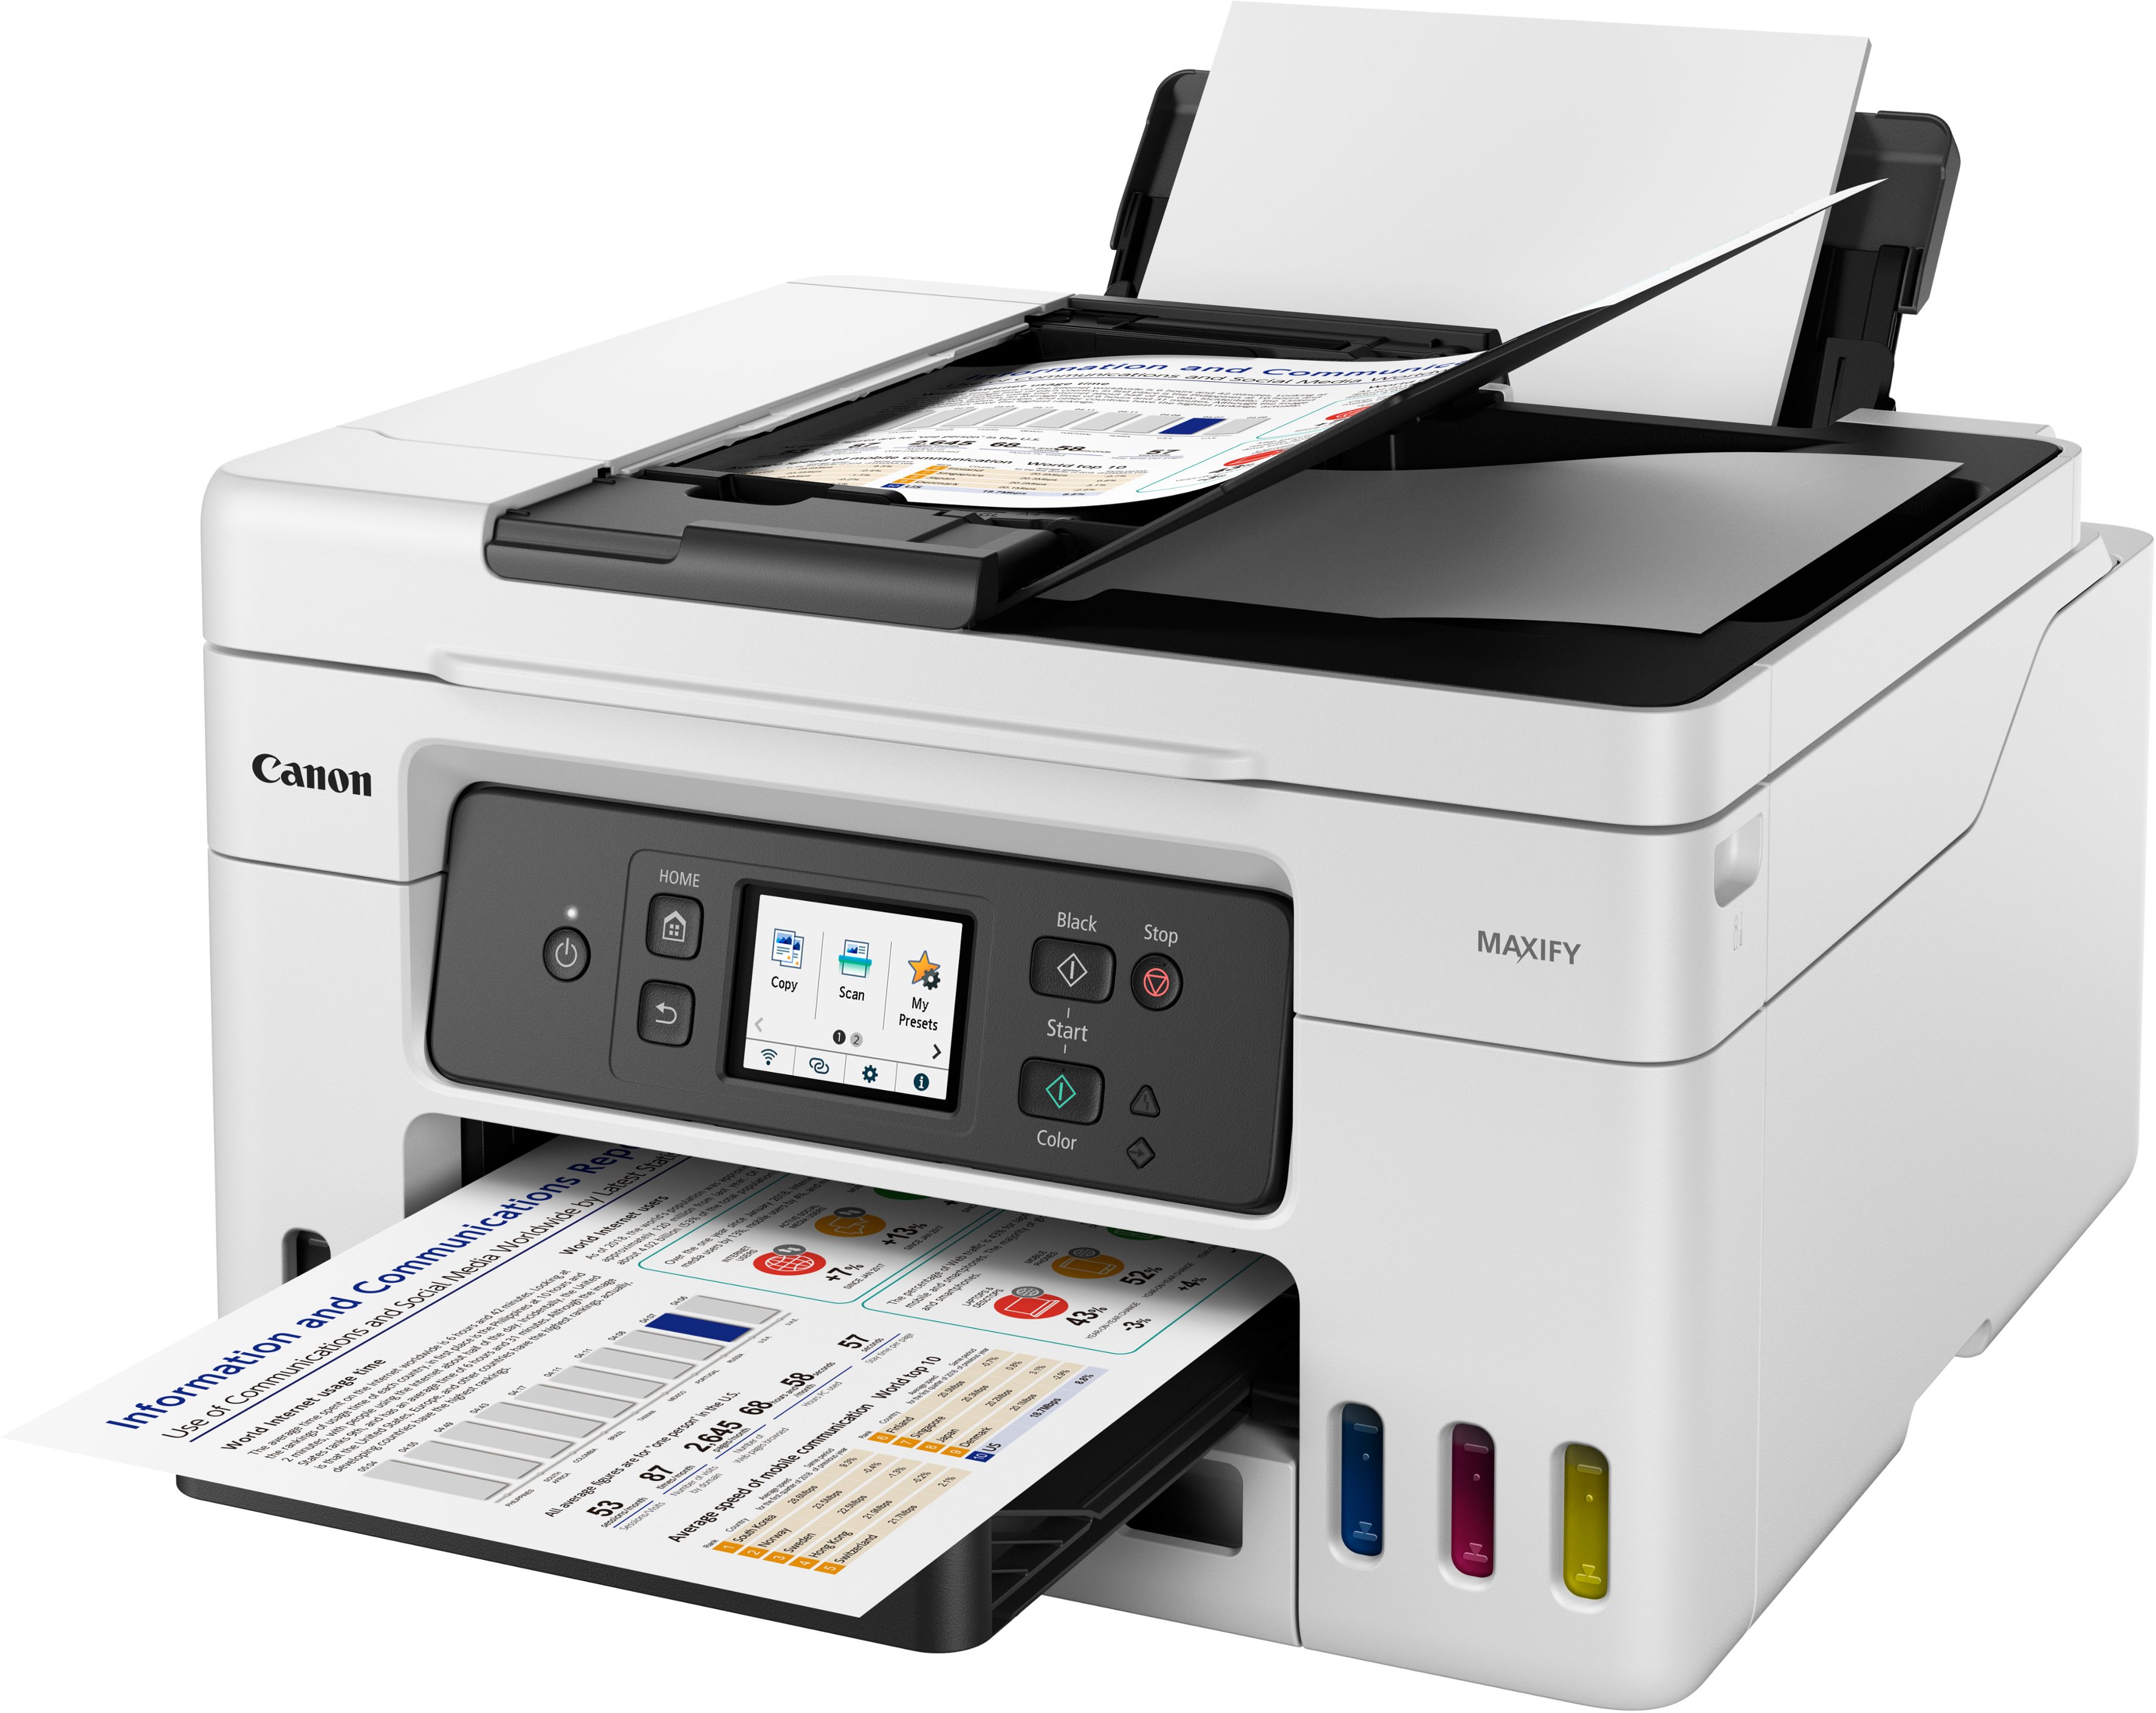 Angle View: Canon - MAXIFY MegaTank GX4020 Wireless All-In-One Inkjet Printer with Fax - White